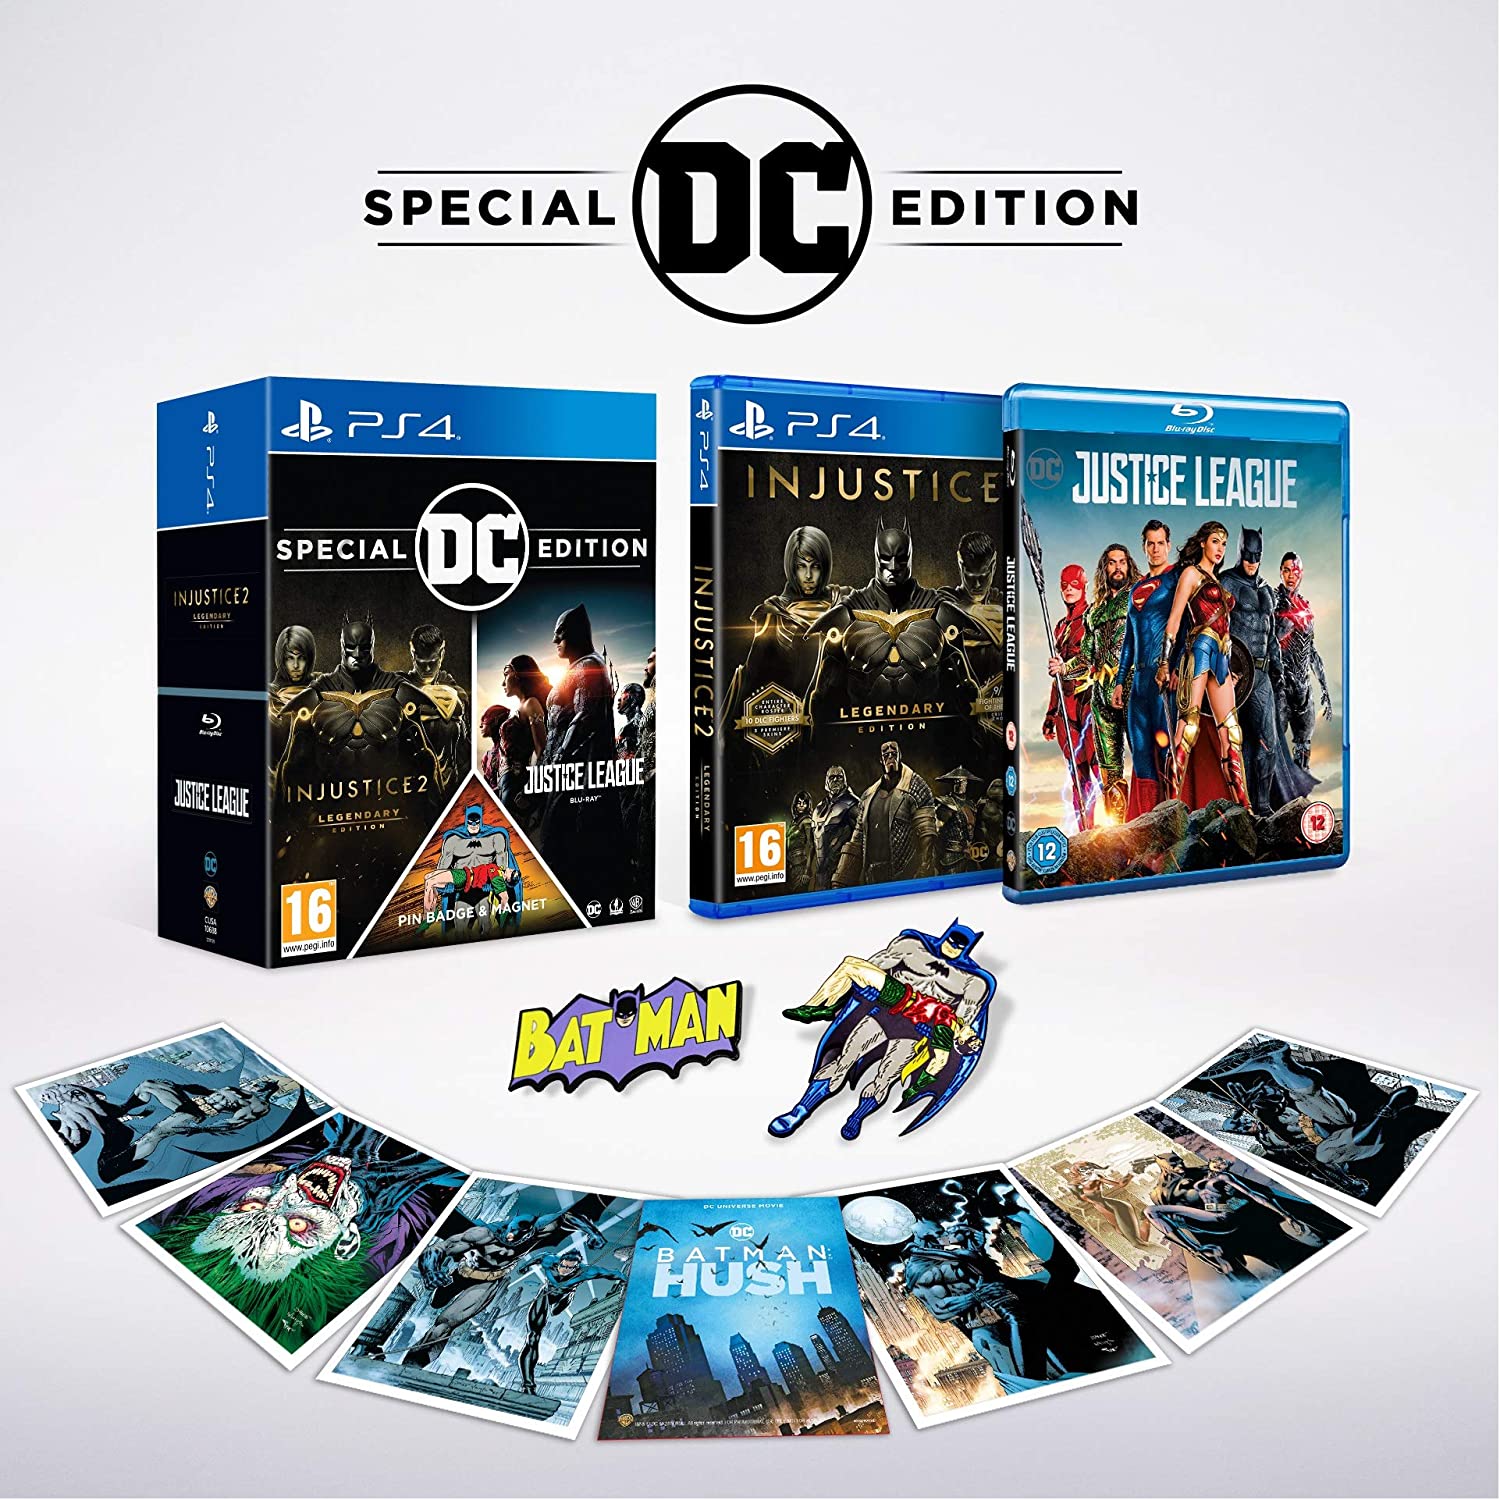 Injustice 2 Legendary Edition (Special DC Edition)